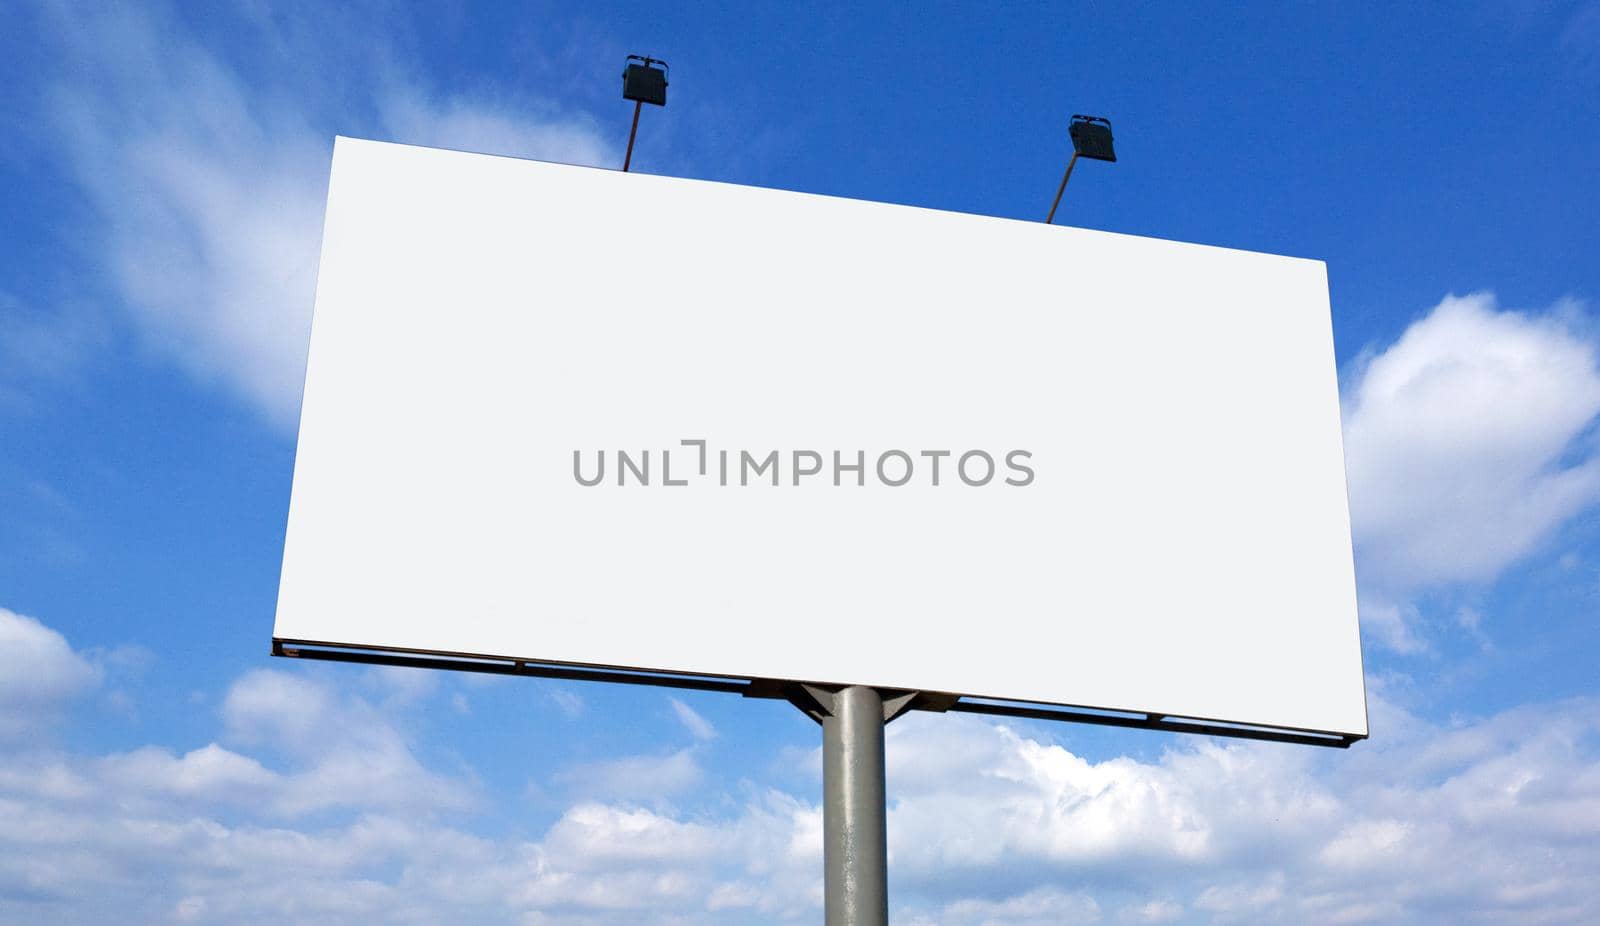 Blank billboard against blue sky, put your own text here